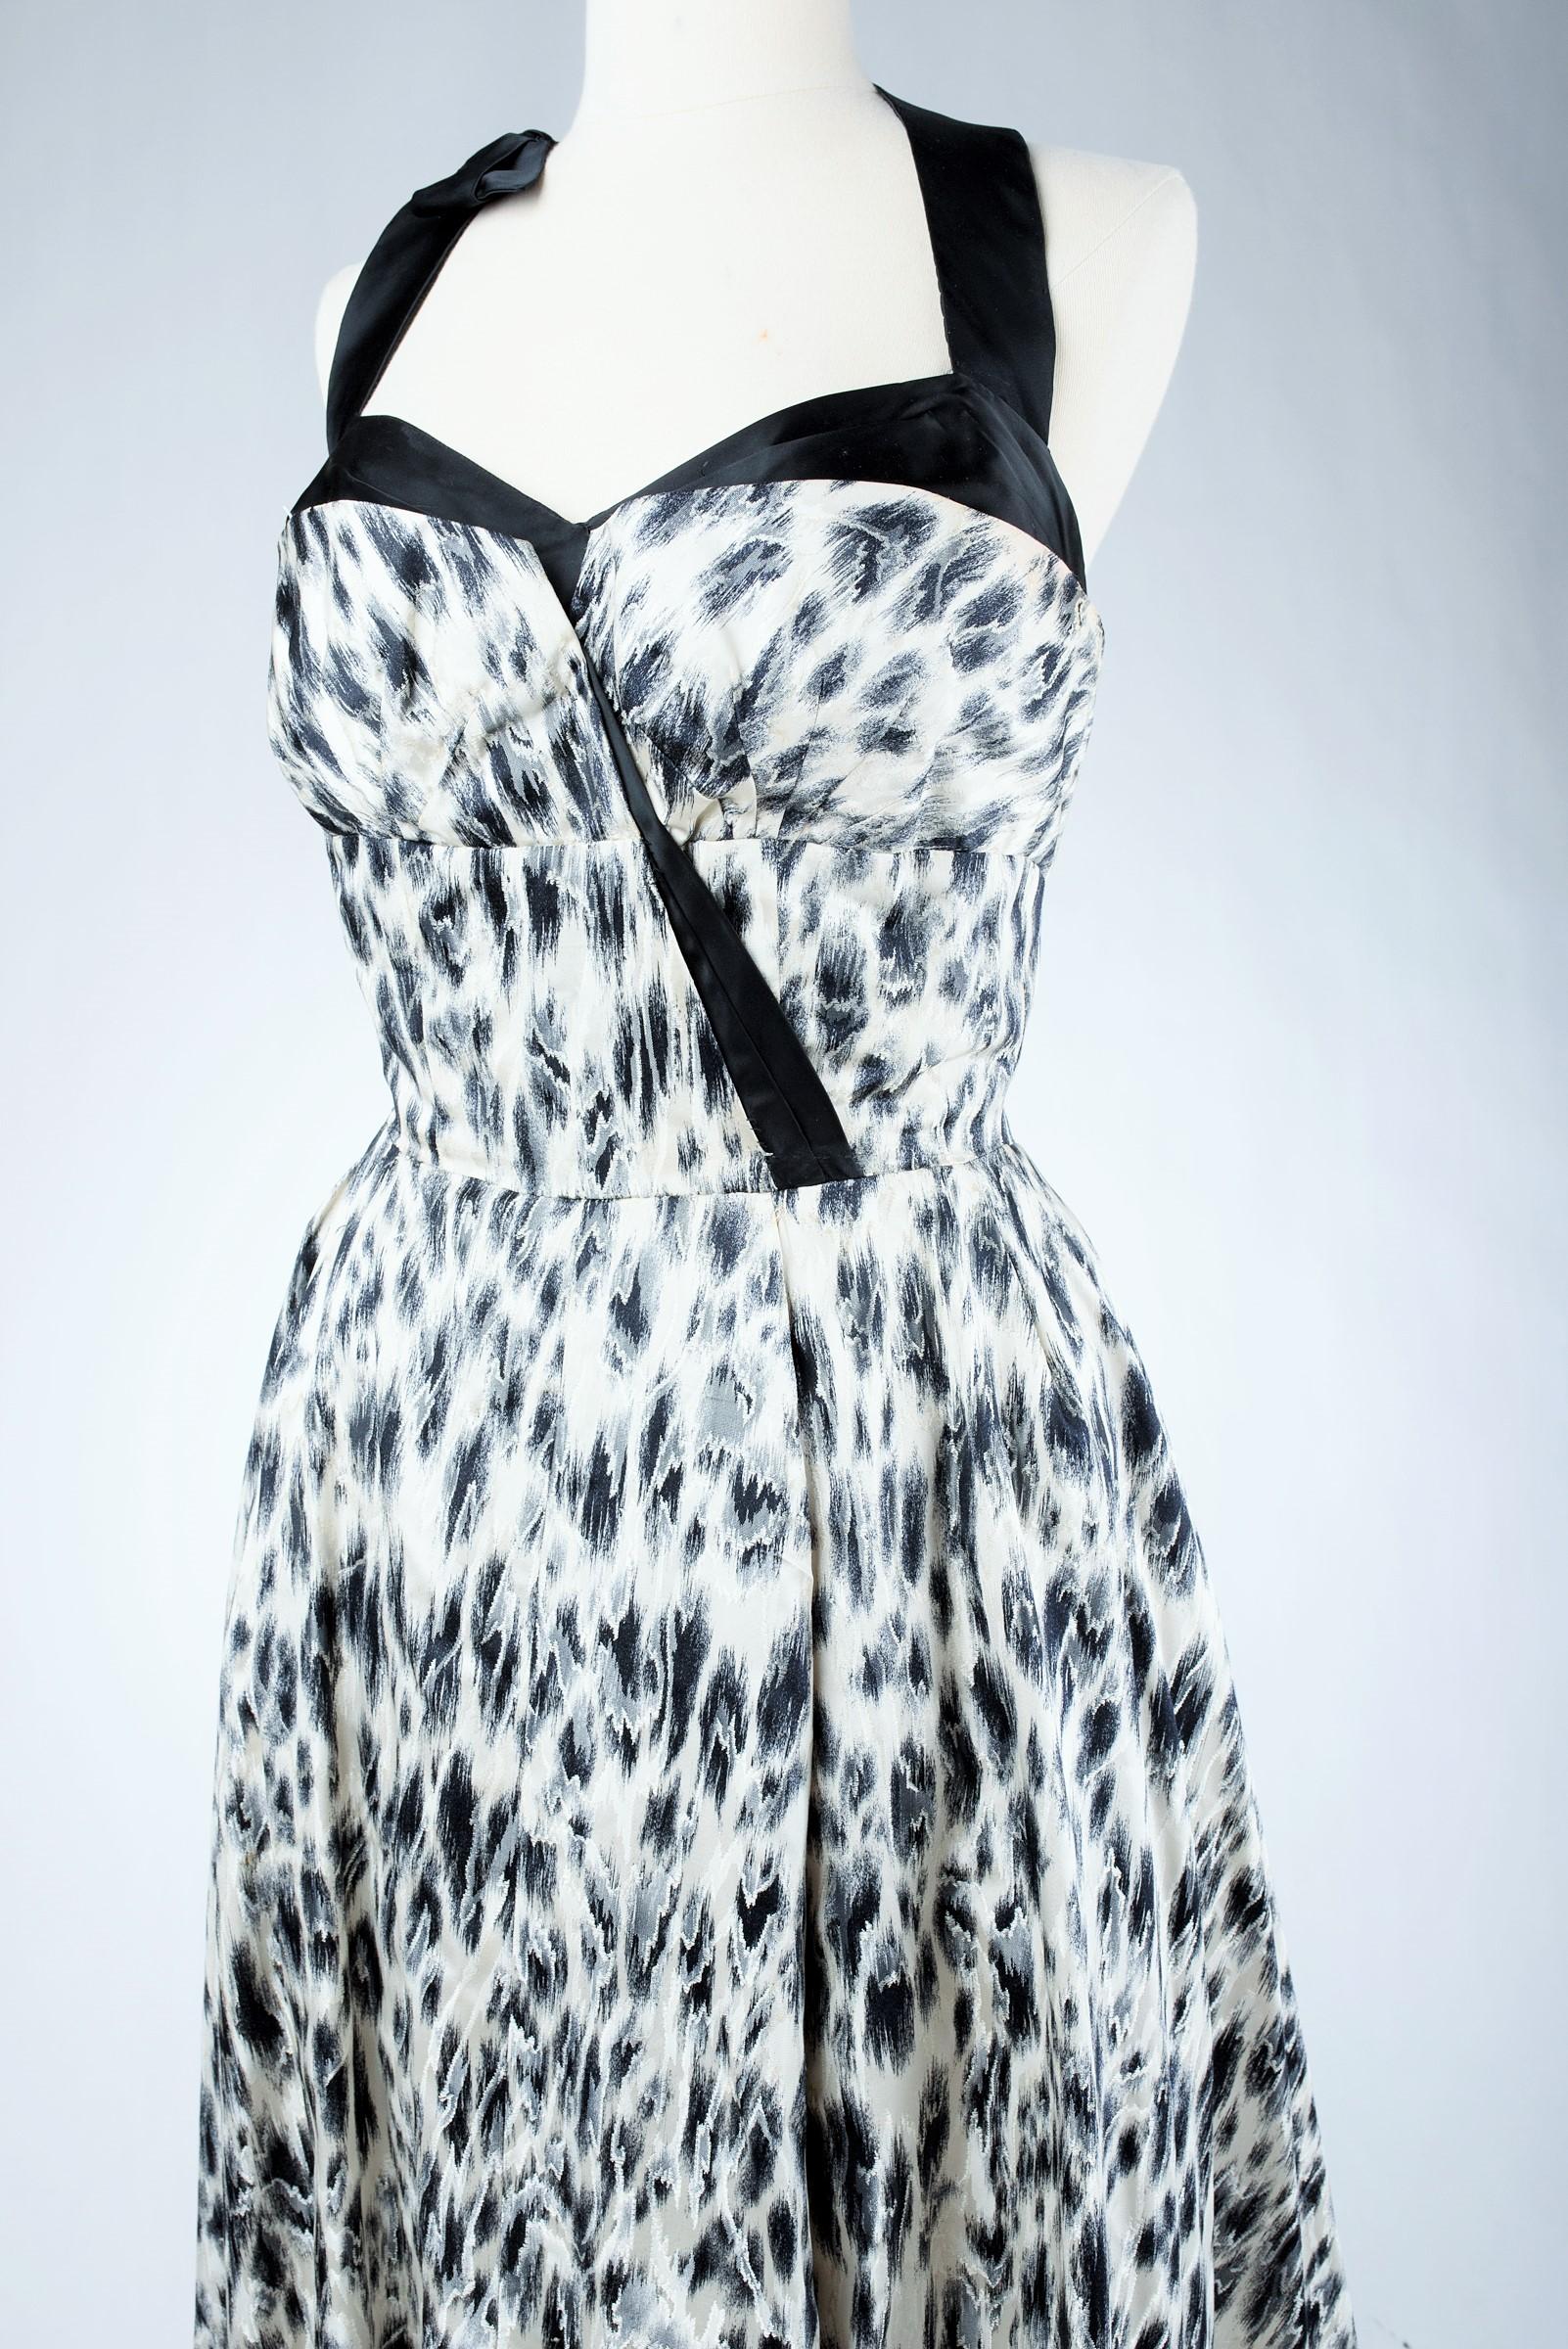 Circa 1955-1960
France
Beautiful Grand soir dress in black and white leopard print satin by Jacques Fath Haute Couture. The whalebone bustier with a large plunging neckline is held by a black satin bow underlining also the balconnet of the chest.